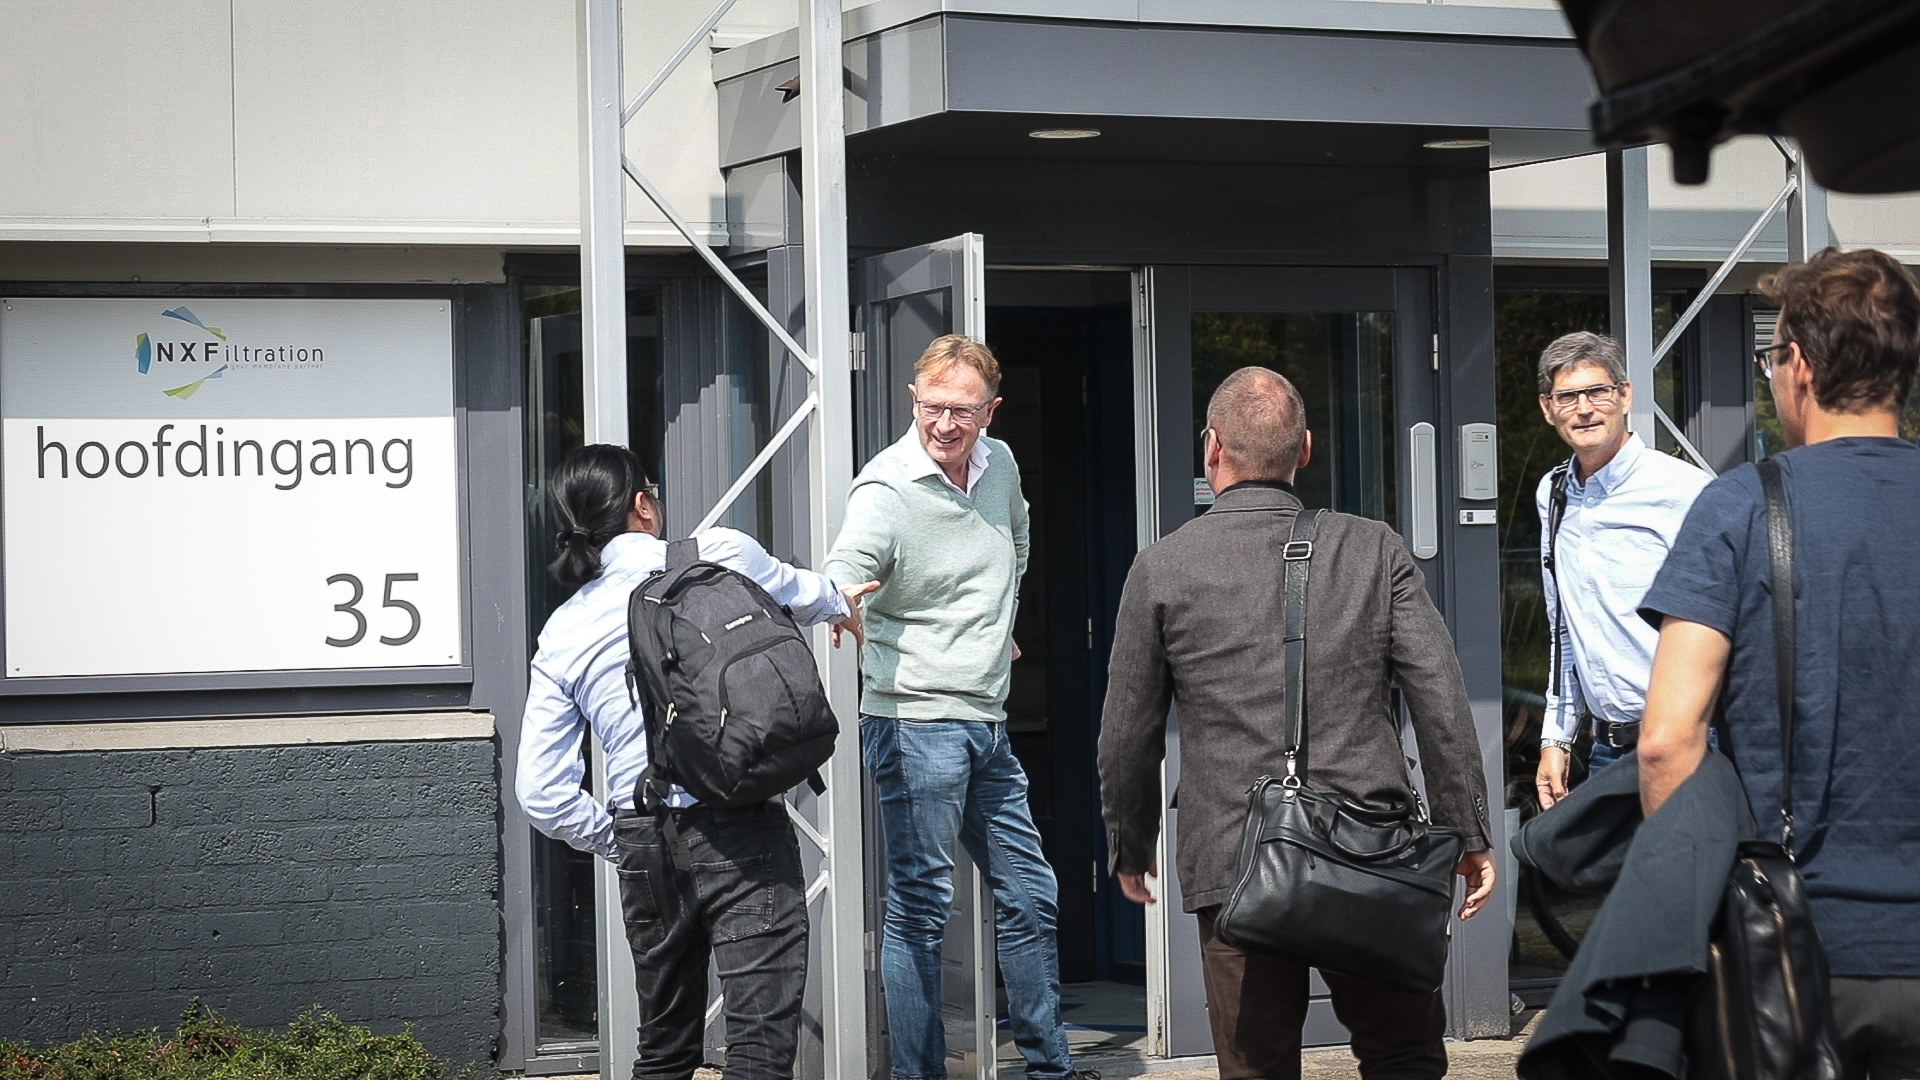 Erik Roesink, general manager at NX Filtration, welcomes representatives from Grundfos and Novozymes.